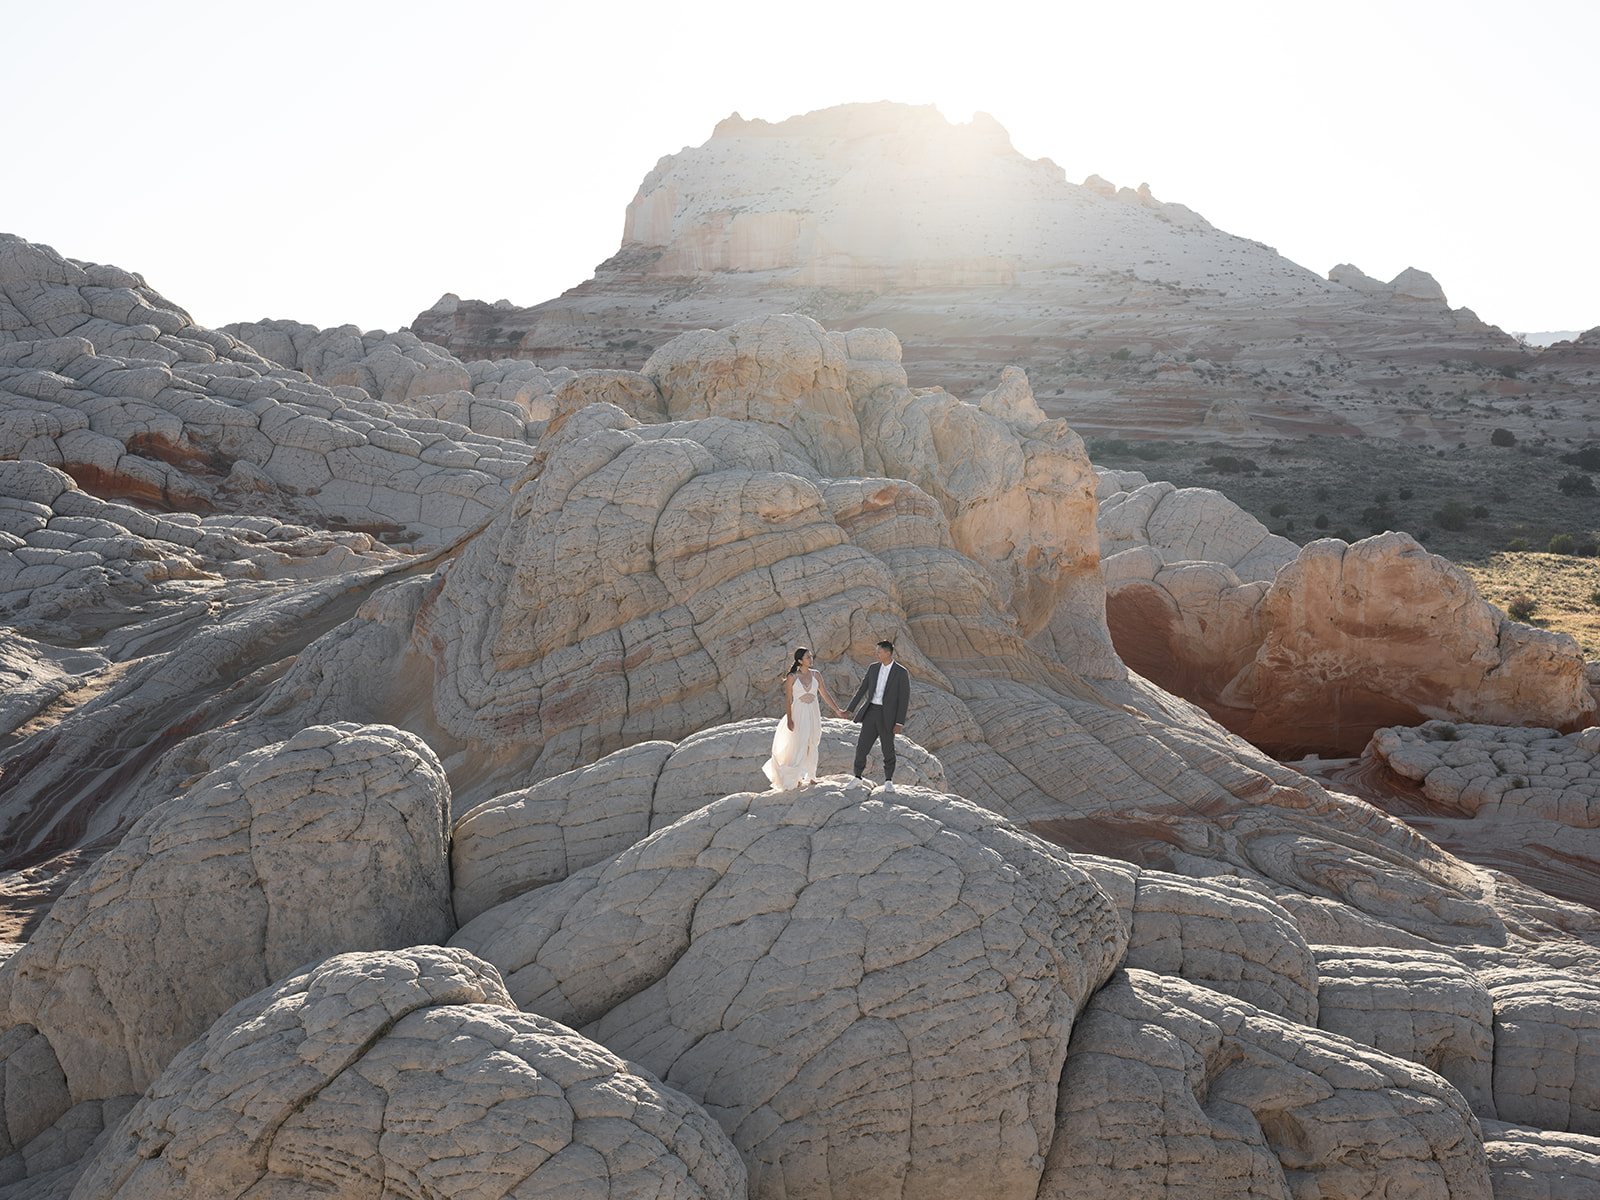 Eloping in the secluded and remote location of White Pocket, Arizona with beautiful views of the Vermilion Cliffs